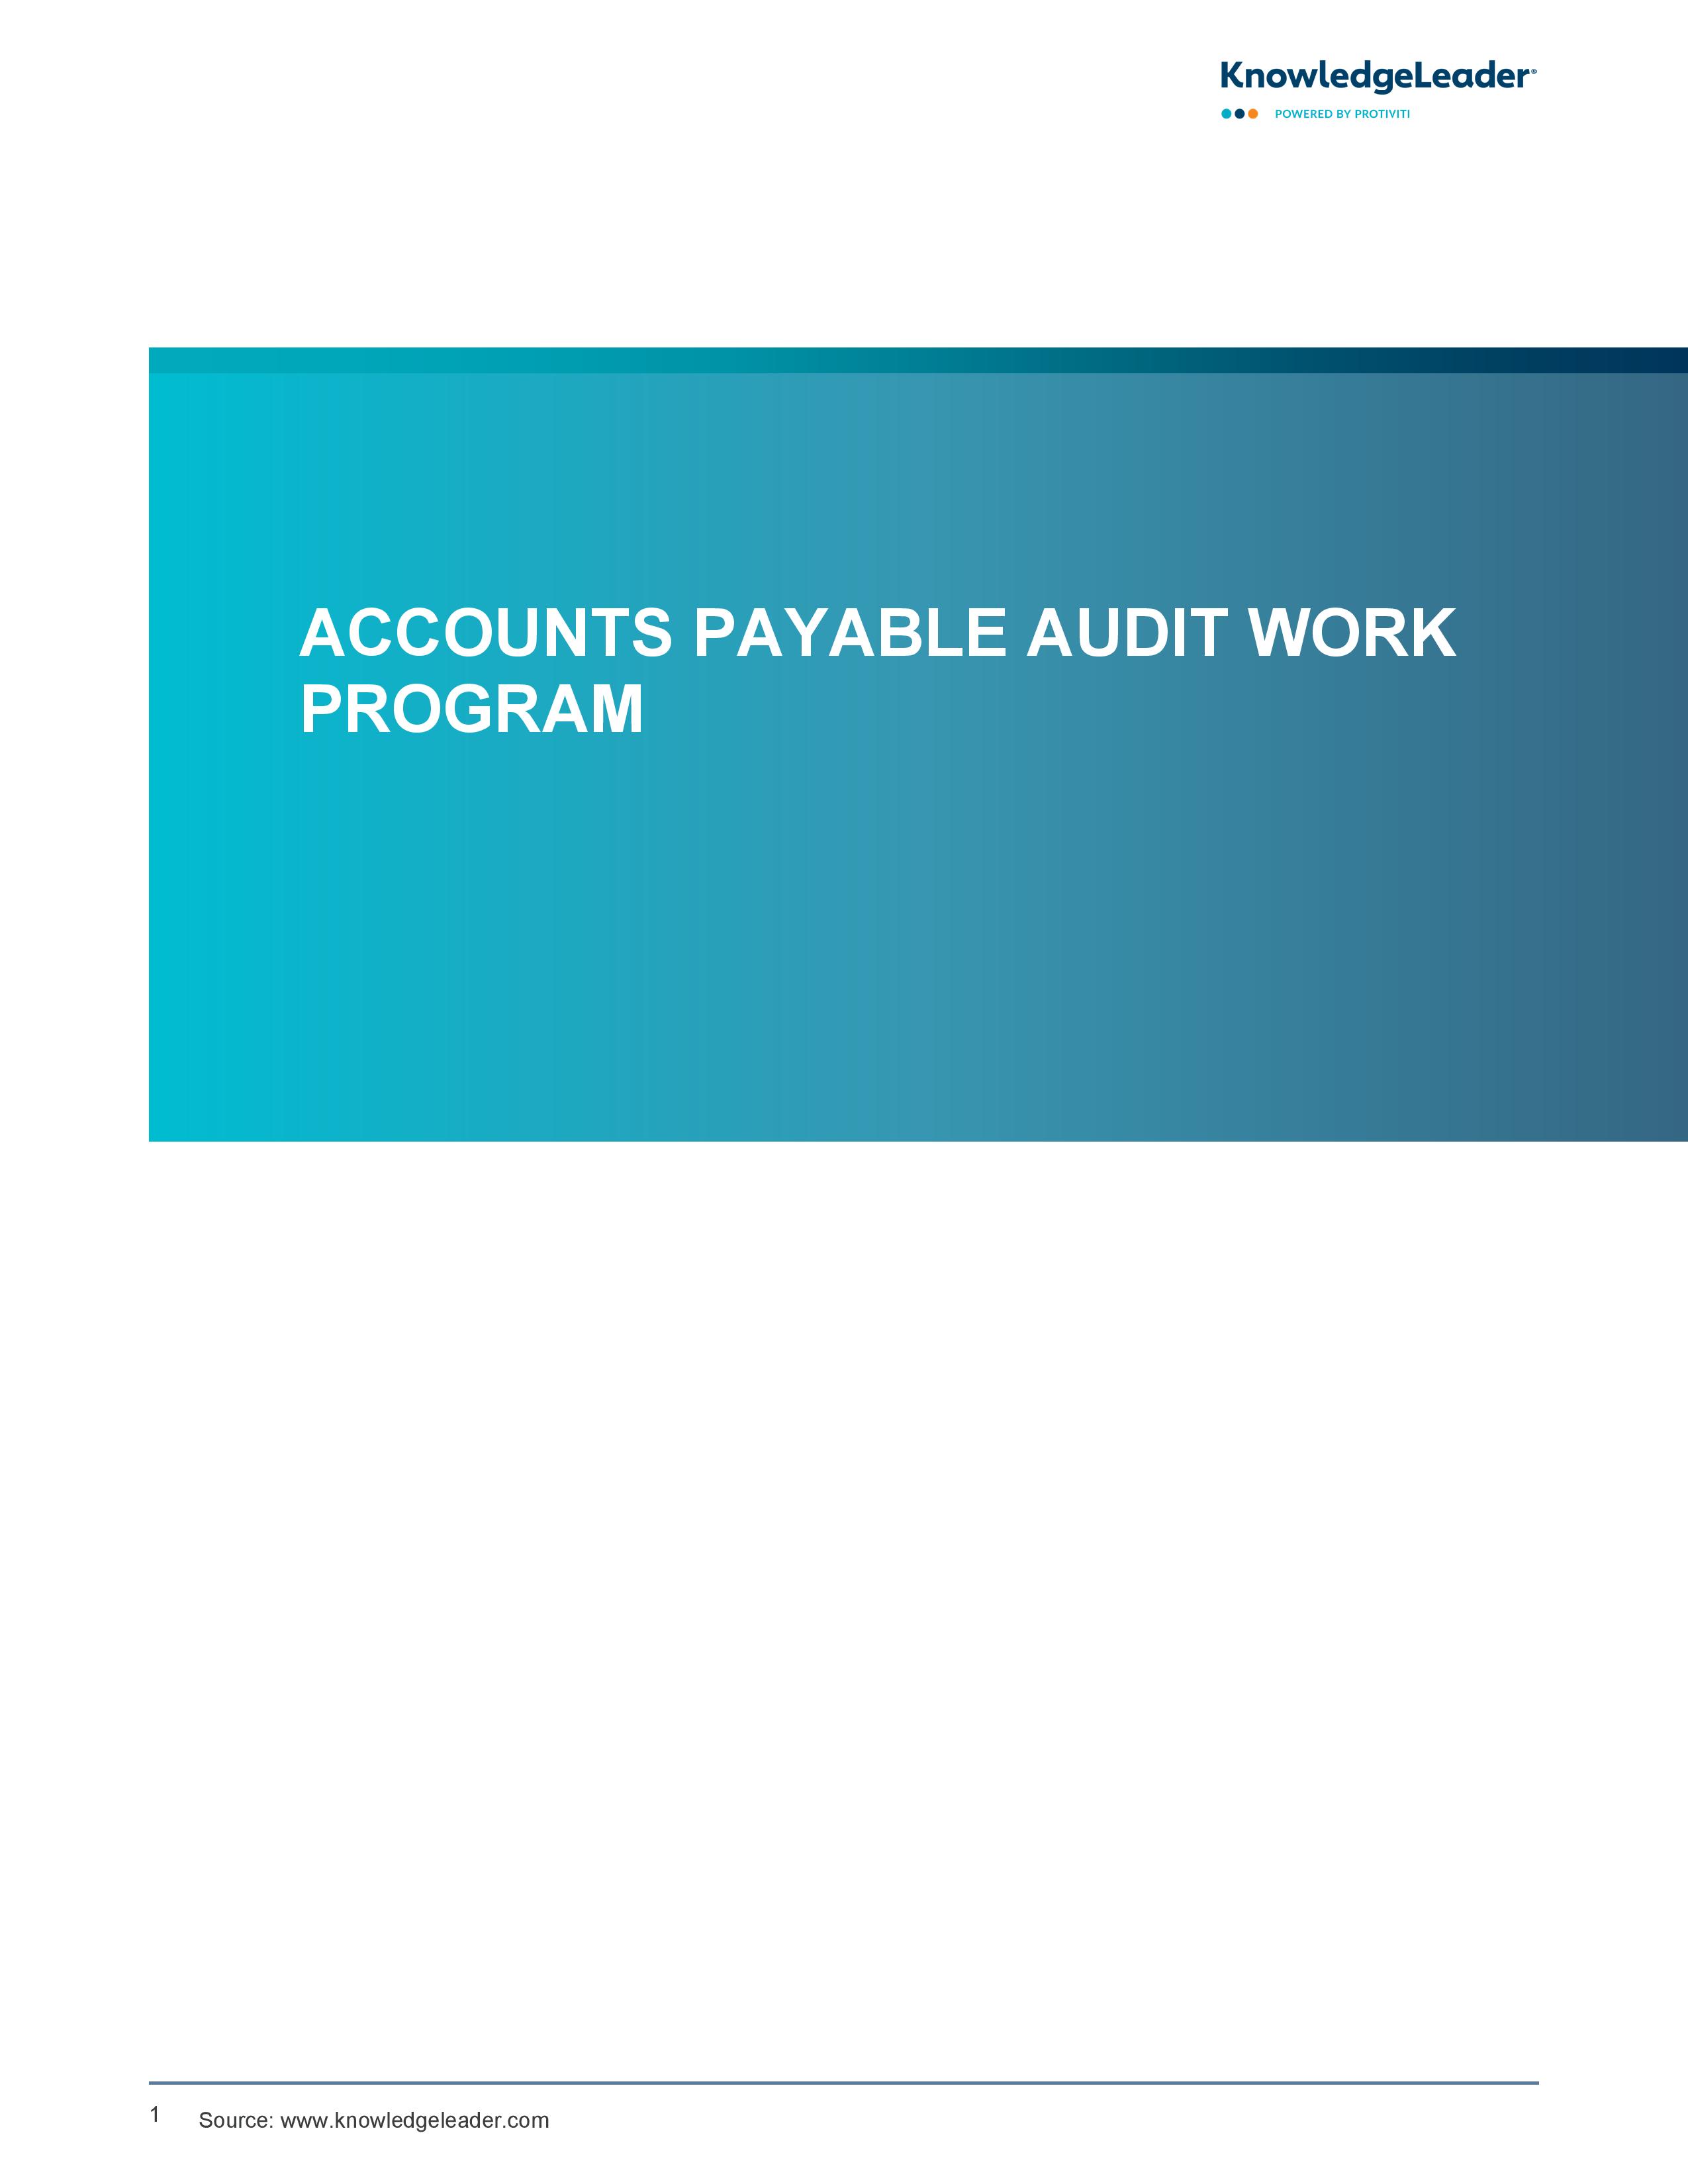 Screenshot of the first page of Accounts Payable Audit Work Program